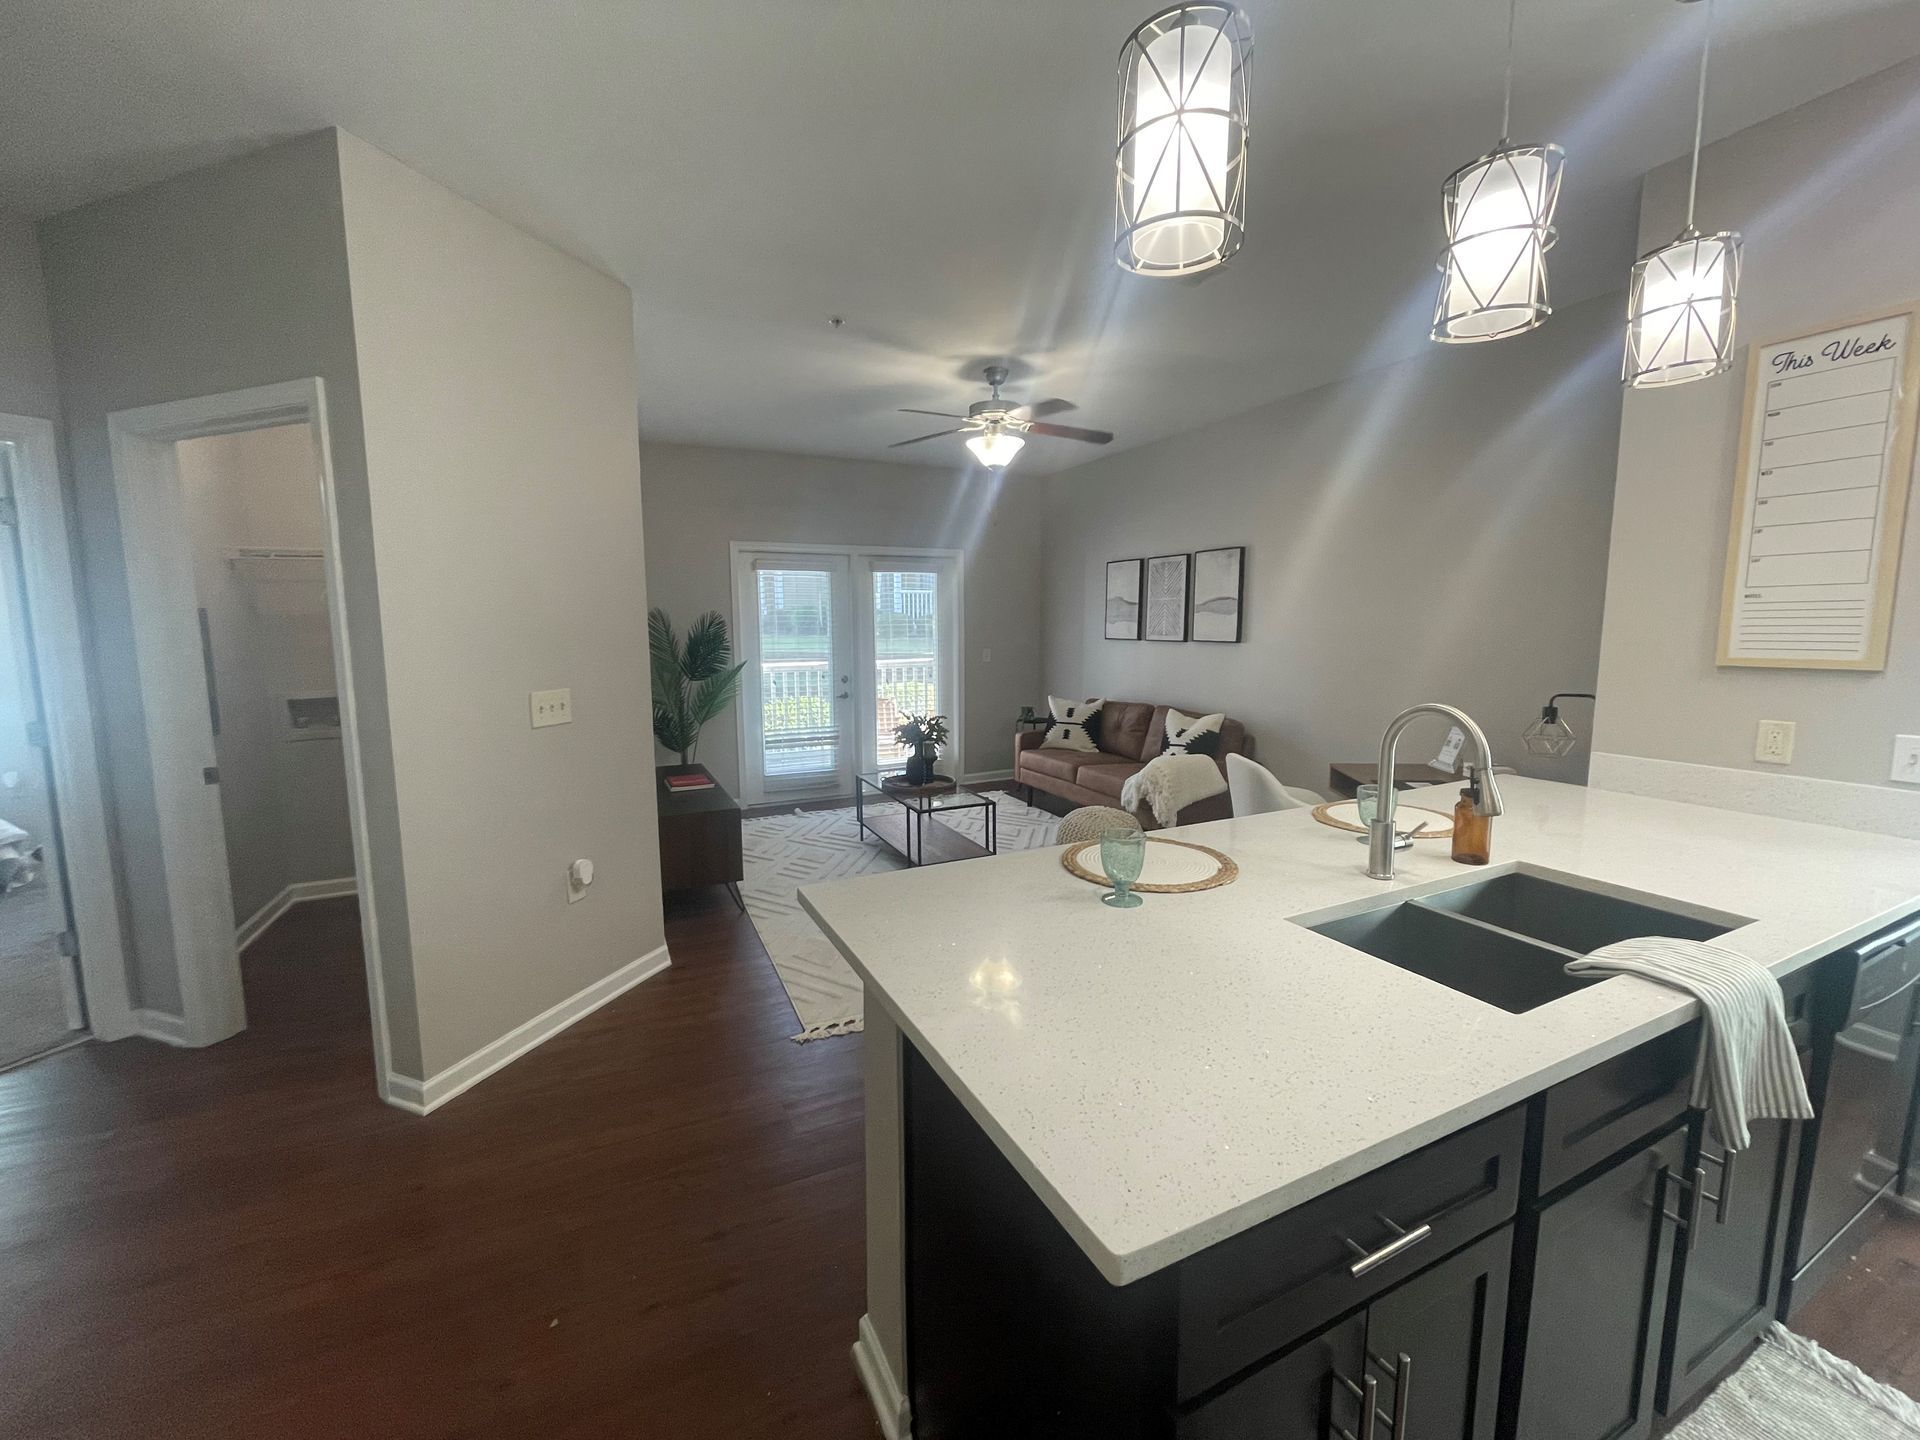 A kitchen with a sink and a living room in the background at Thomaston Crossing.